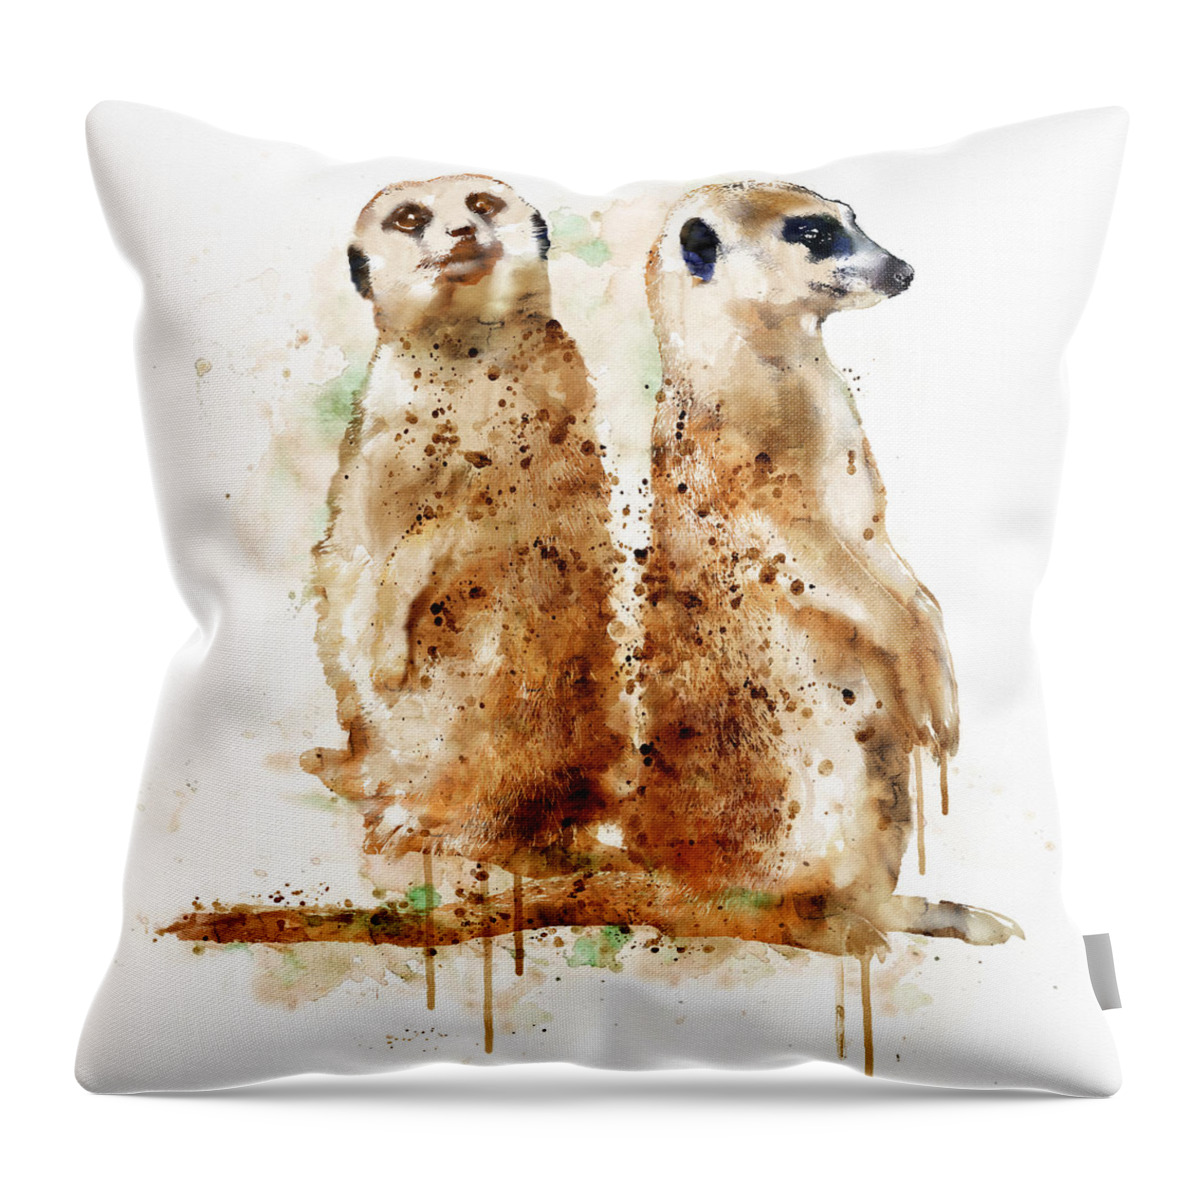 Marian Voicu Throw Pillow featuring the painting Meerkats by Marian Voicu